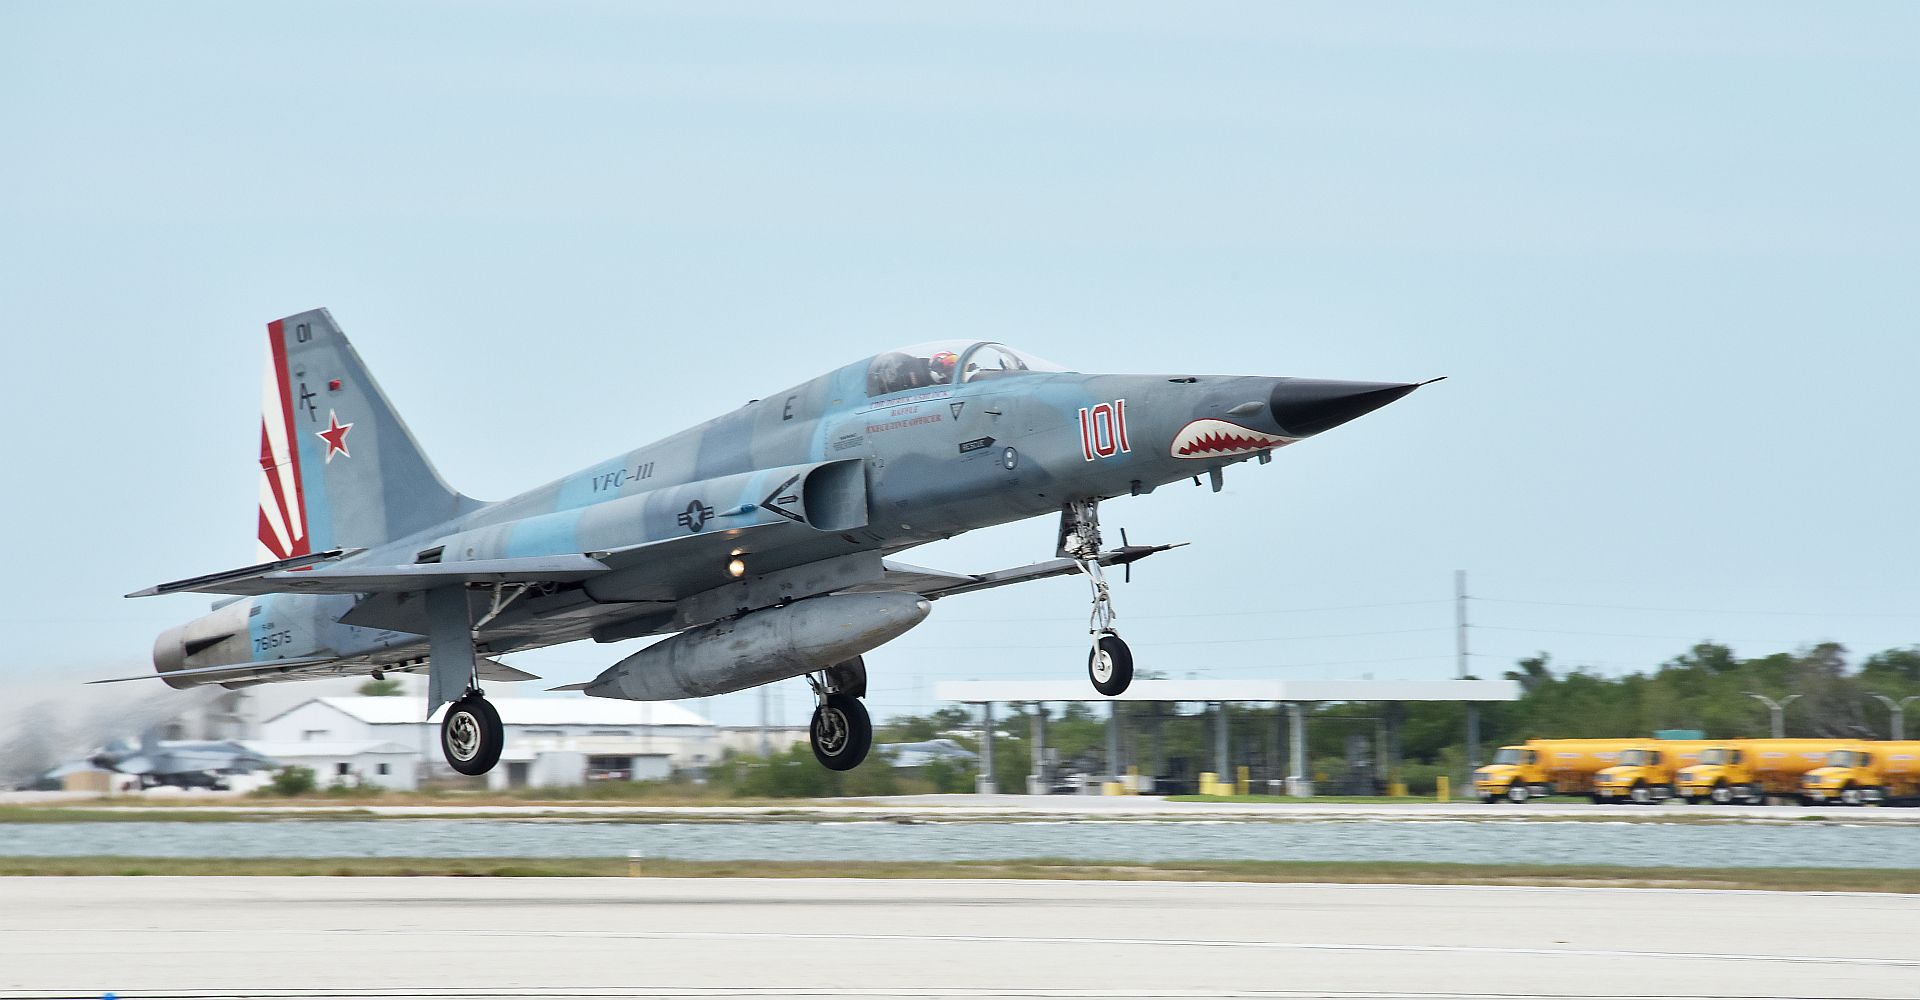 F 5N Tiger II From Fighter Squadron Composite 111 Sun Downers Takes Off From Naval Air Station Key Wests Boca Chica Field